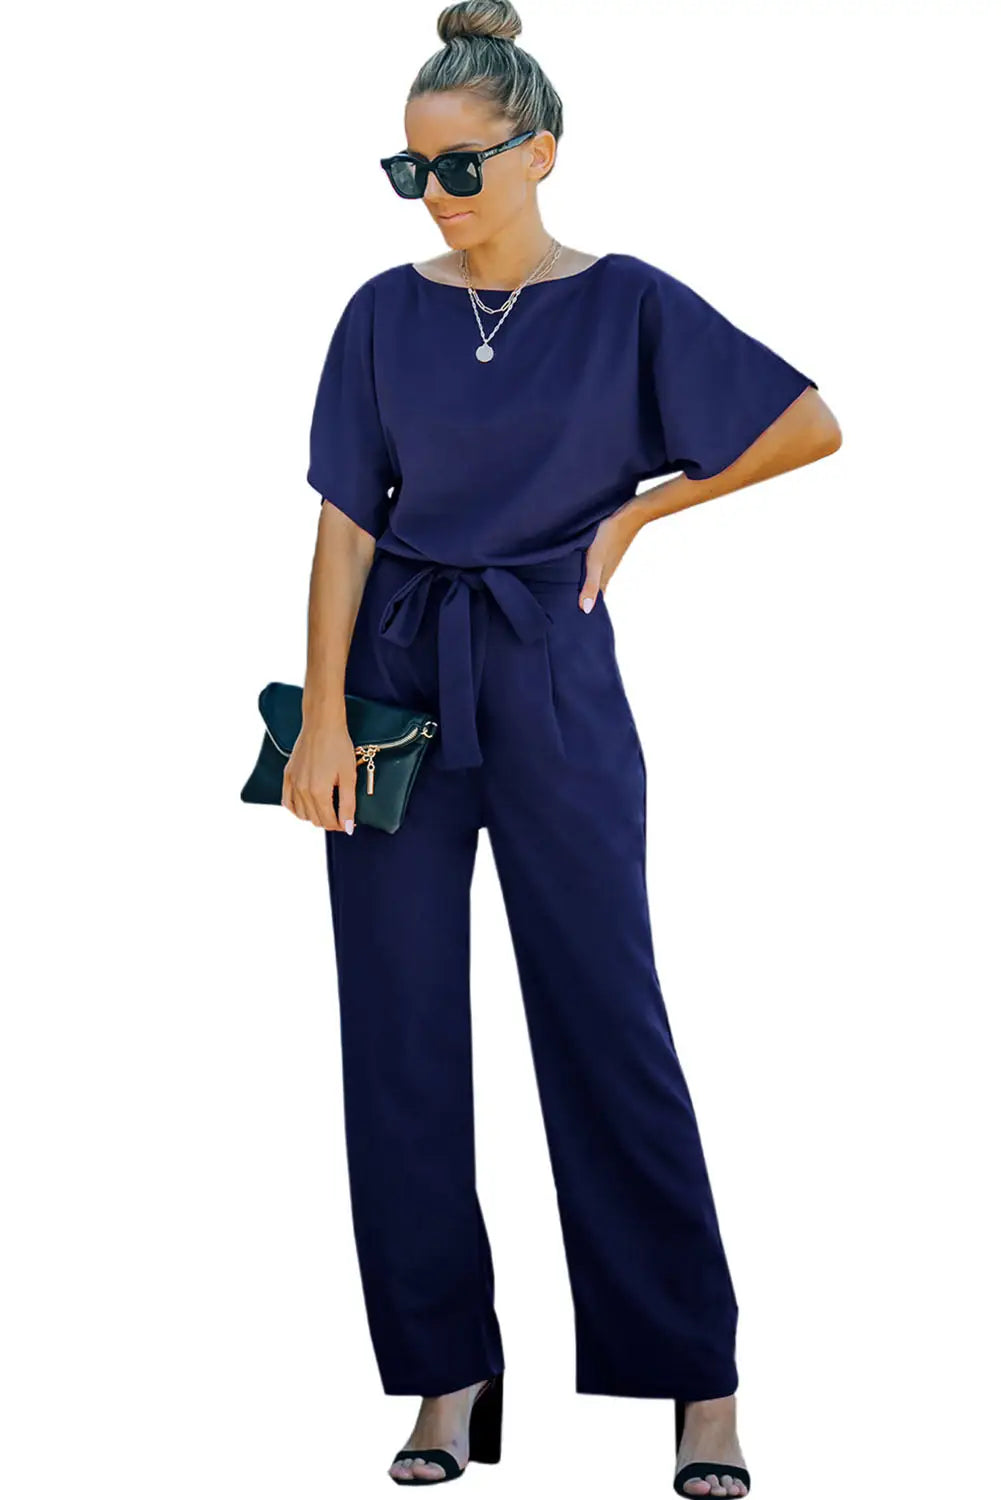 Red belted wide leg jumpsuit - bottoms